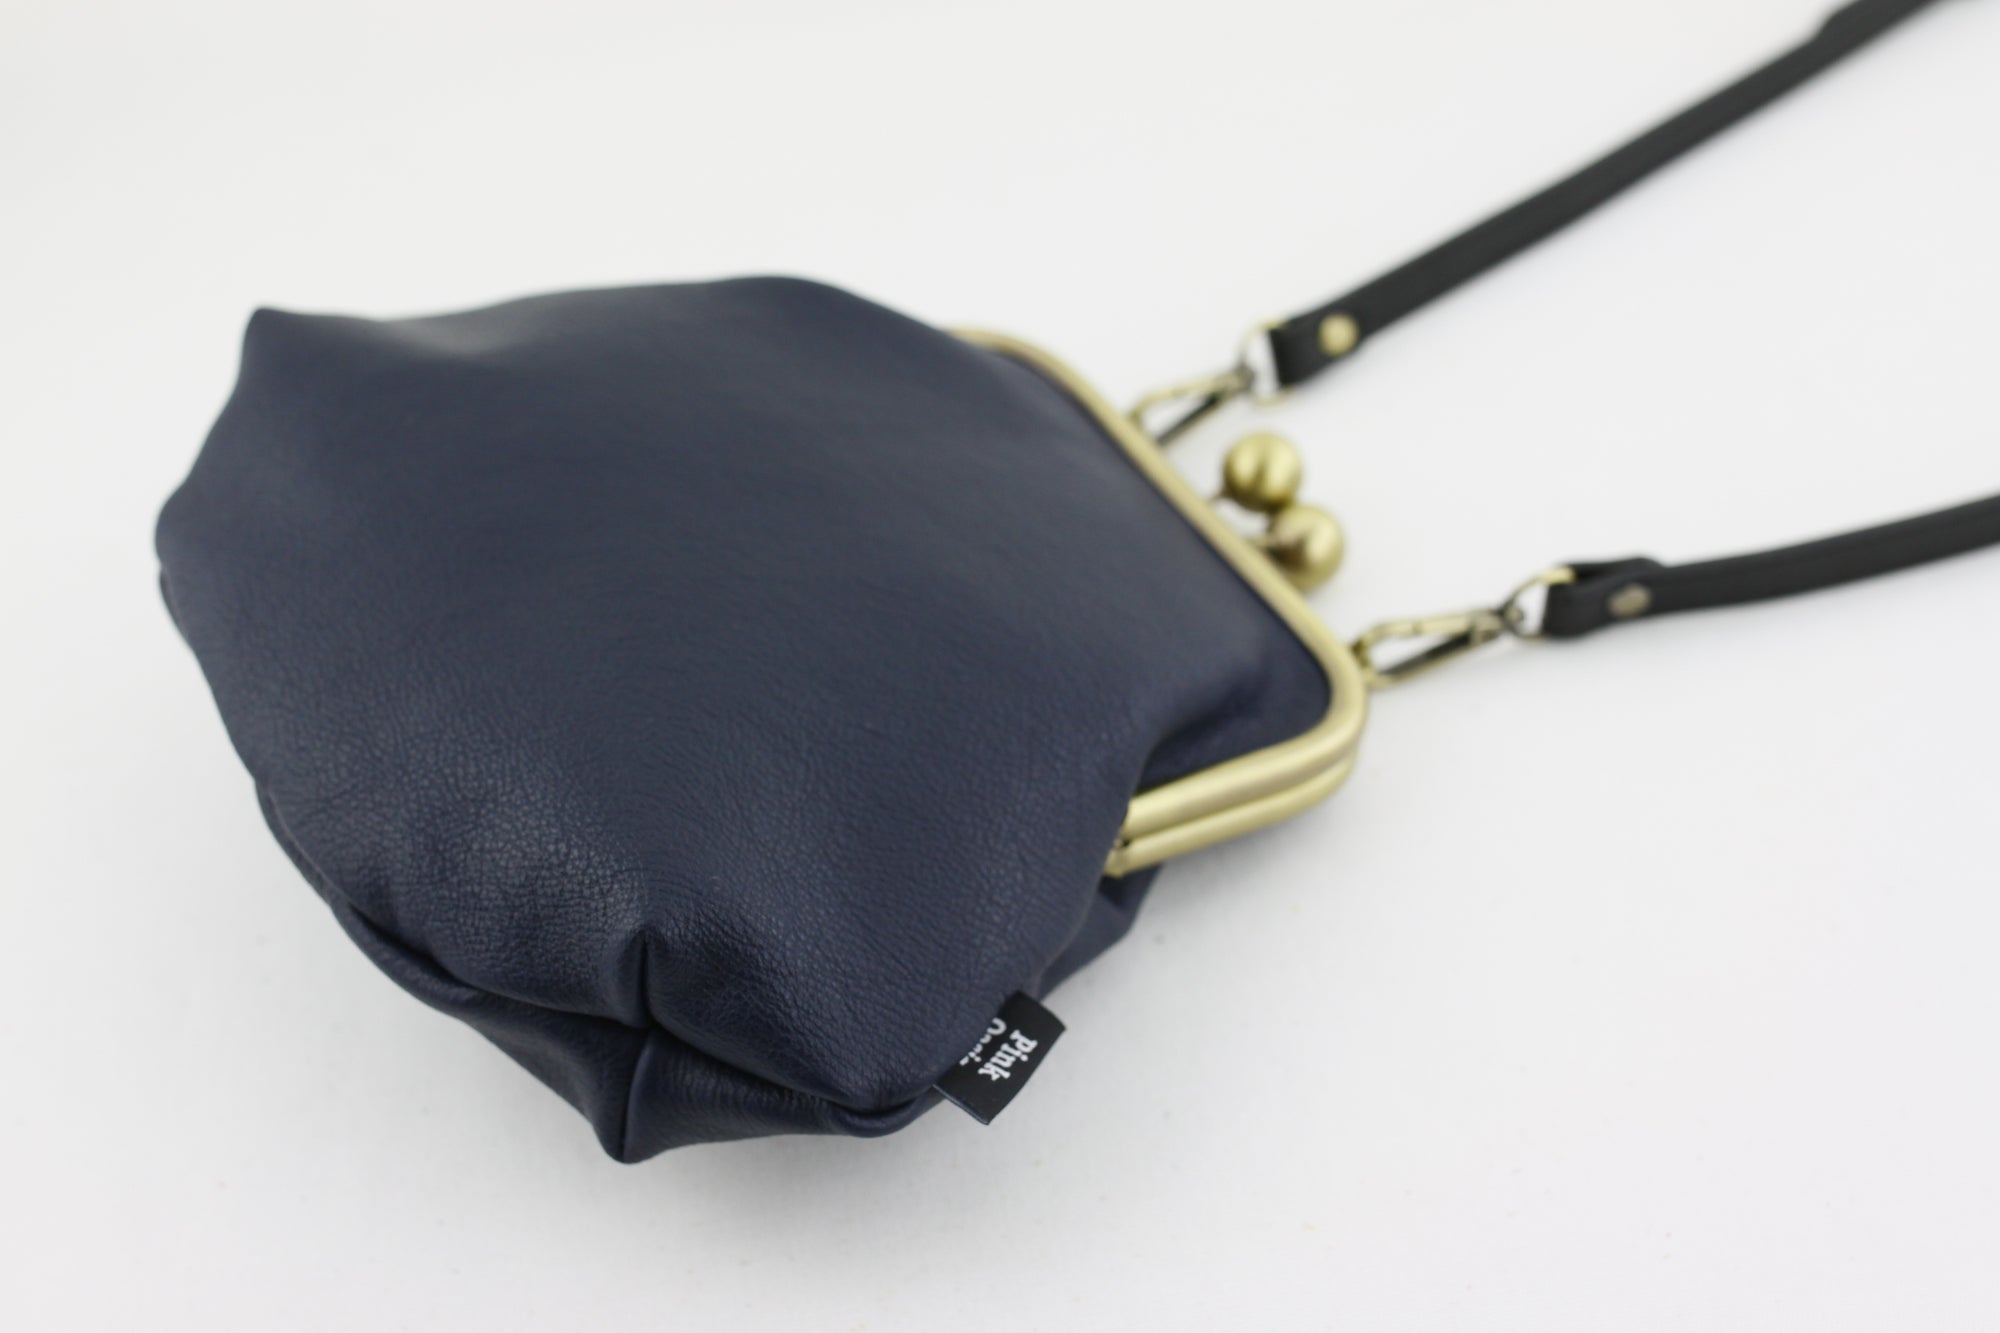 Women's Navy Genuine Leather Clutch Bag with Strap | PINKOASIS